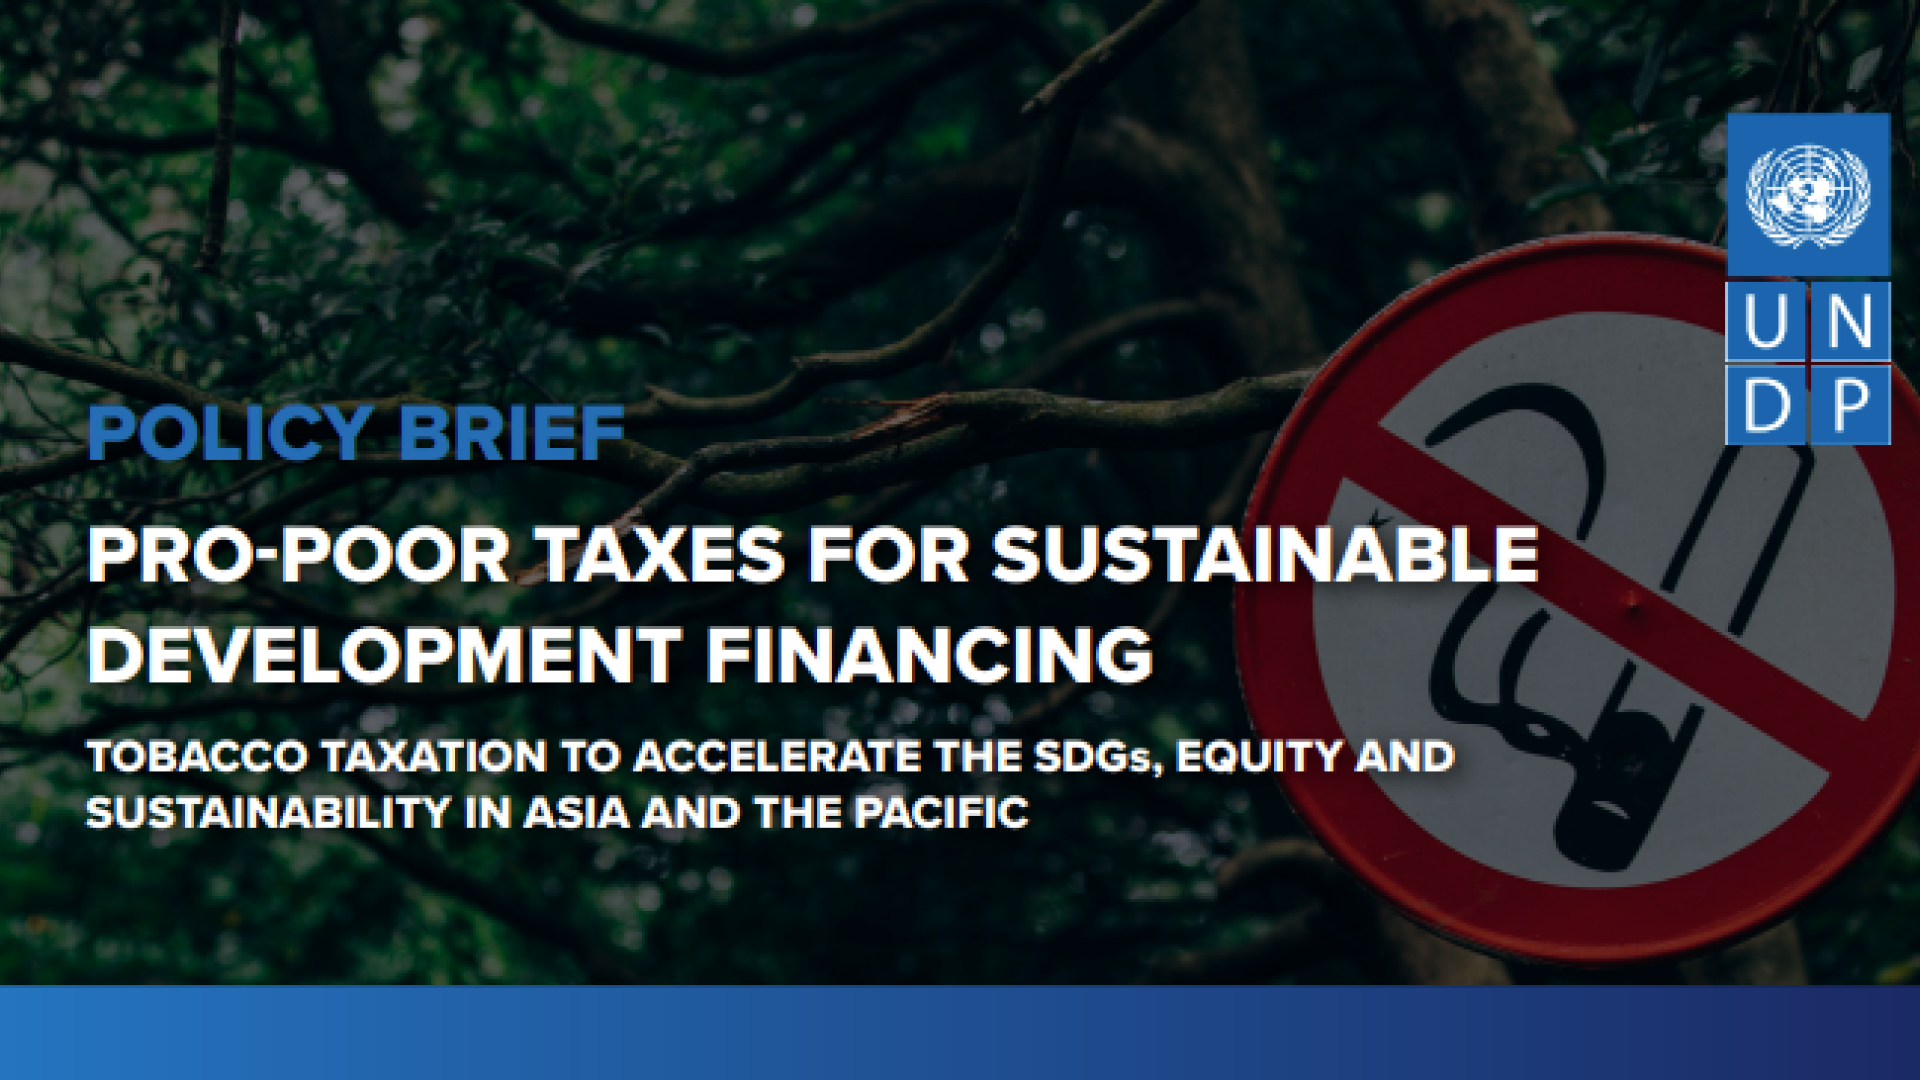 Policy Brief: Pro-poor Taxes for Sustainable Development Financing